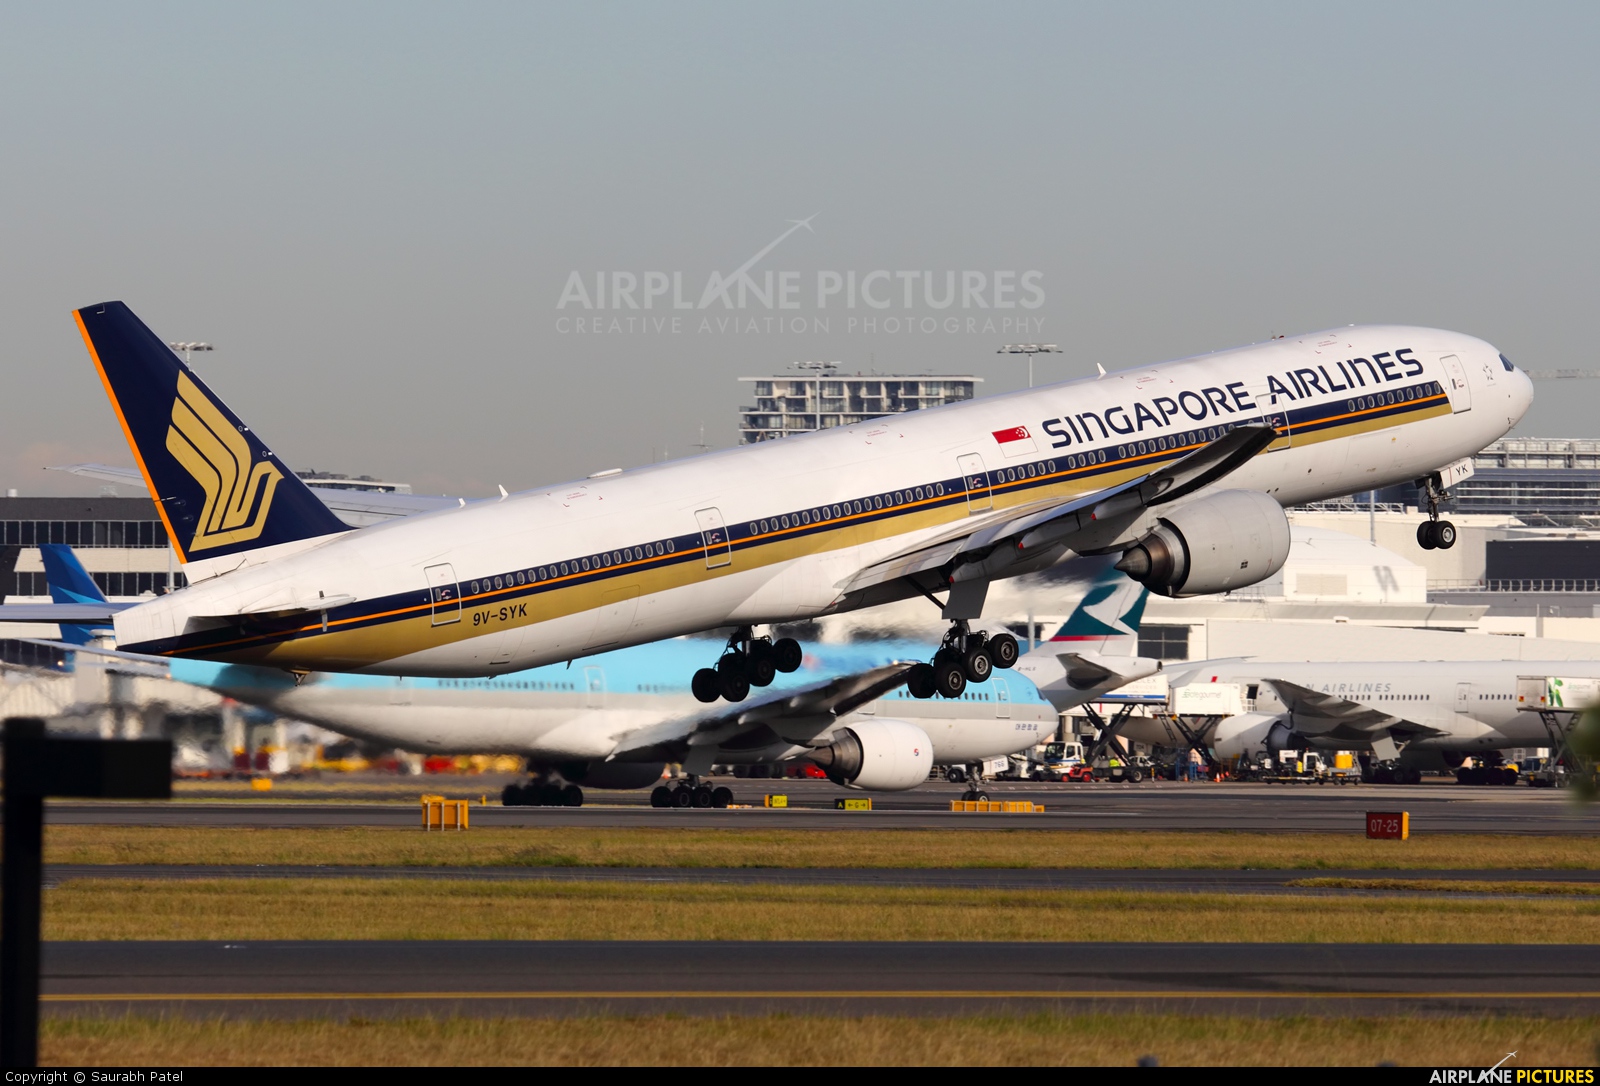 Singapore Airlines 9V-SYK aircraft at Sydney - Kingsford Smith Intl, NSW